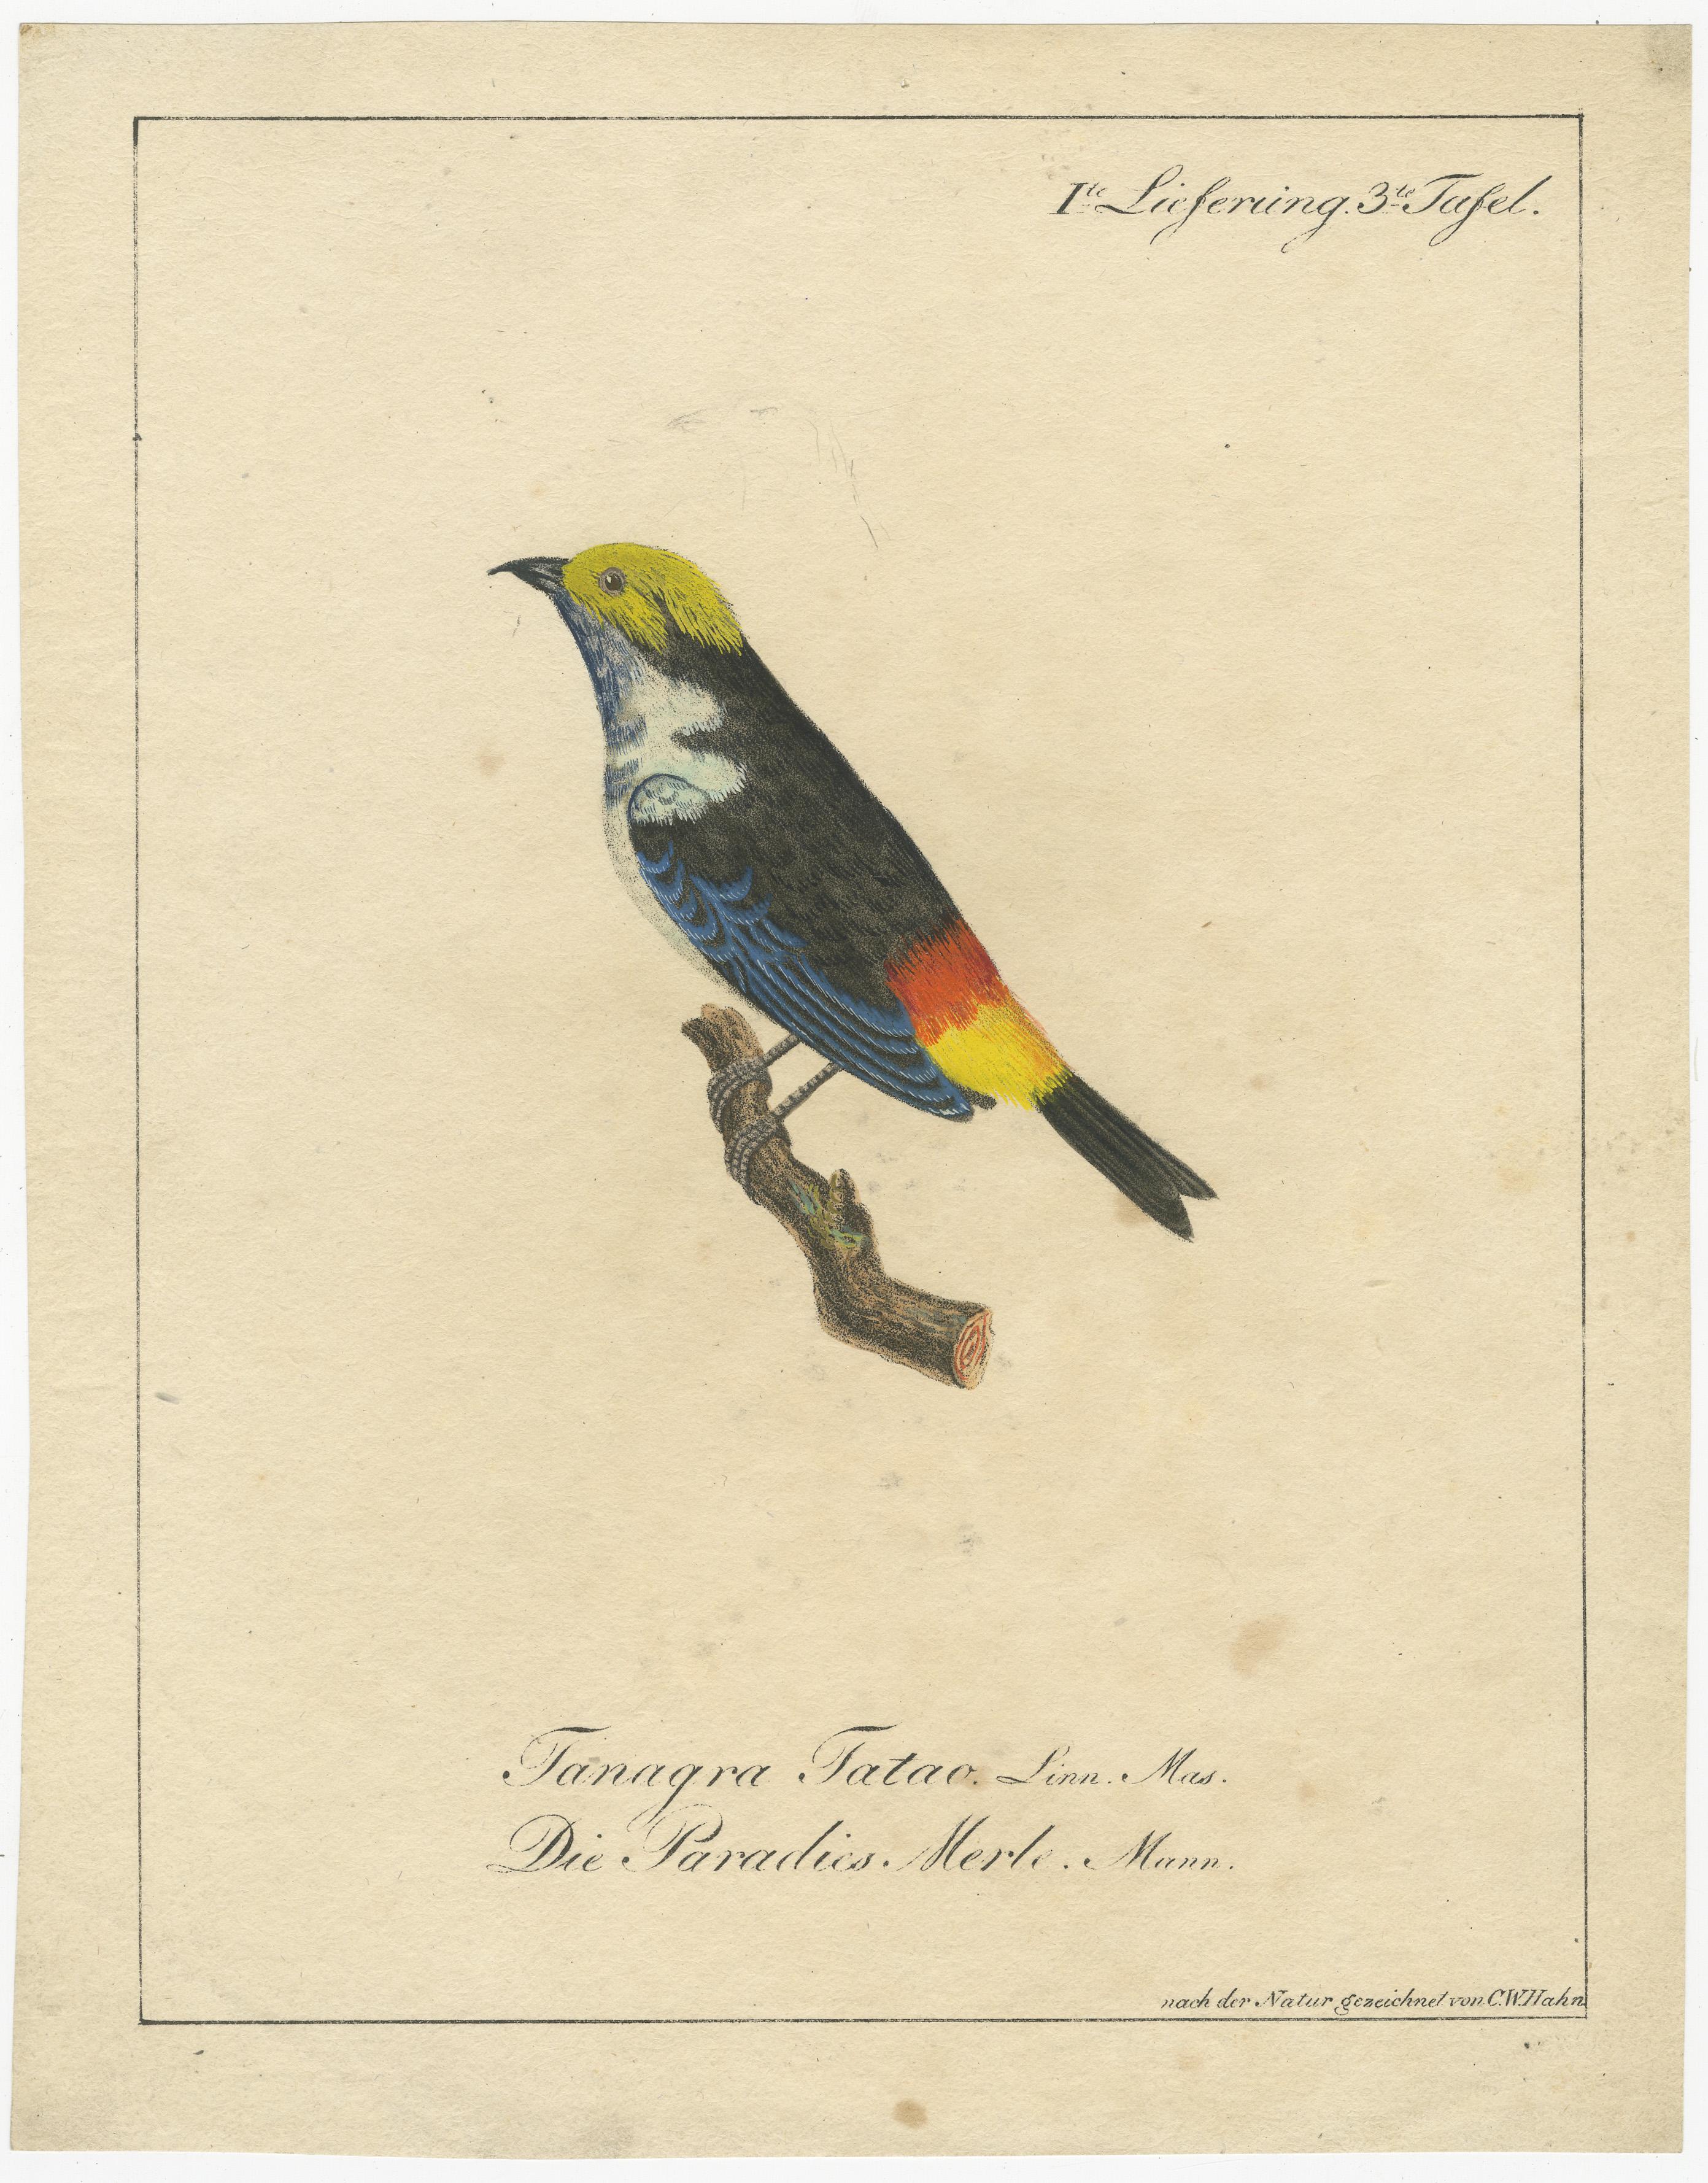 This original lithograph  is a hand-colored lithograph from the early 19th century, depicting a vibrantly colored bird identified as 